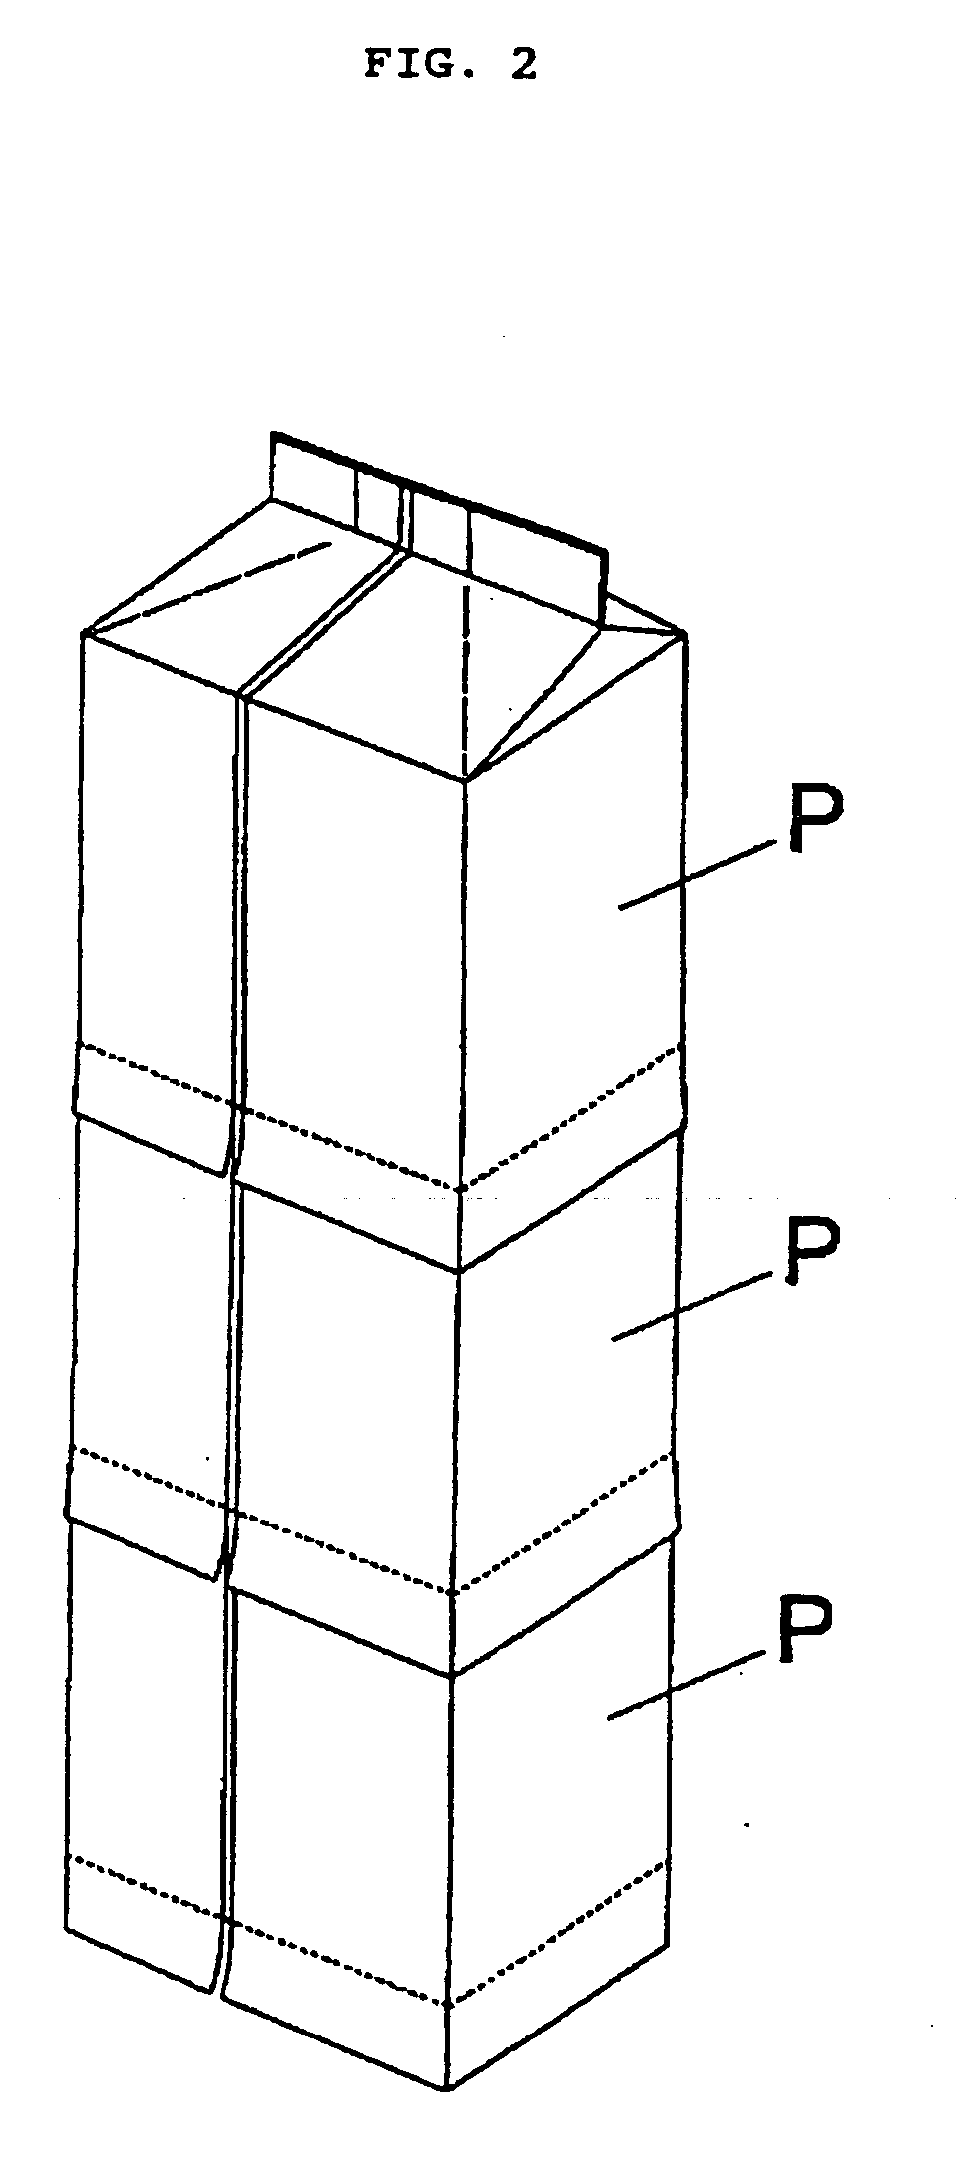 Self-standing packaging bag, packaging body, web roll, and manufacturing method therefor